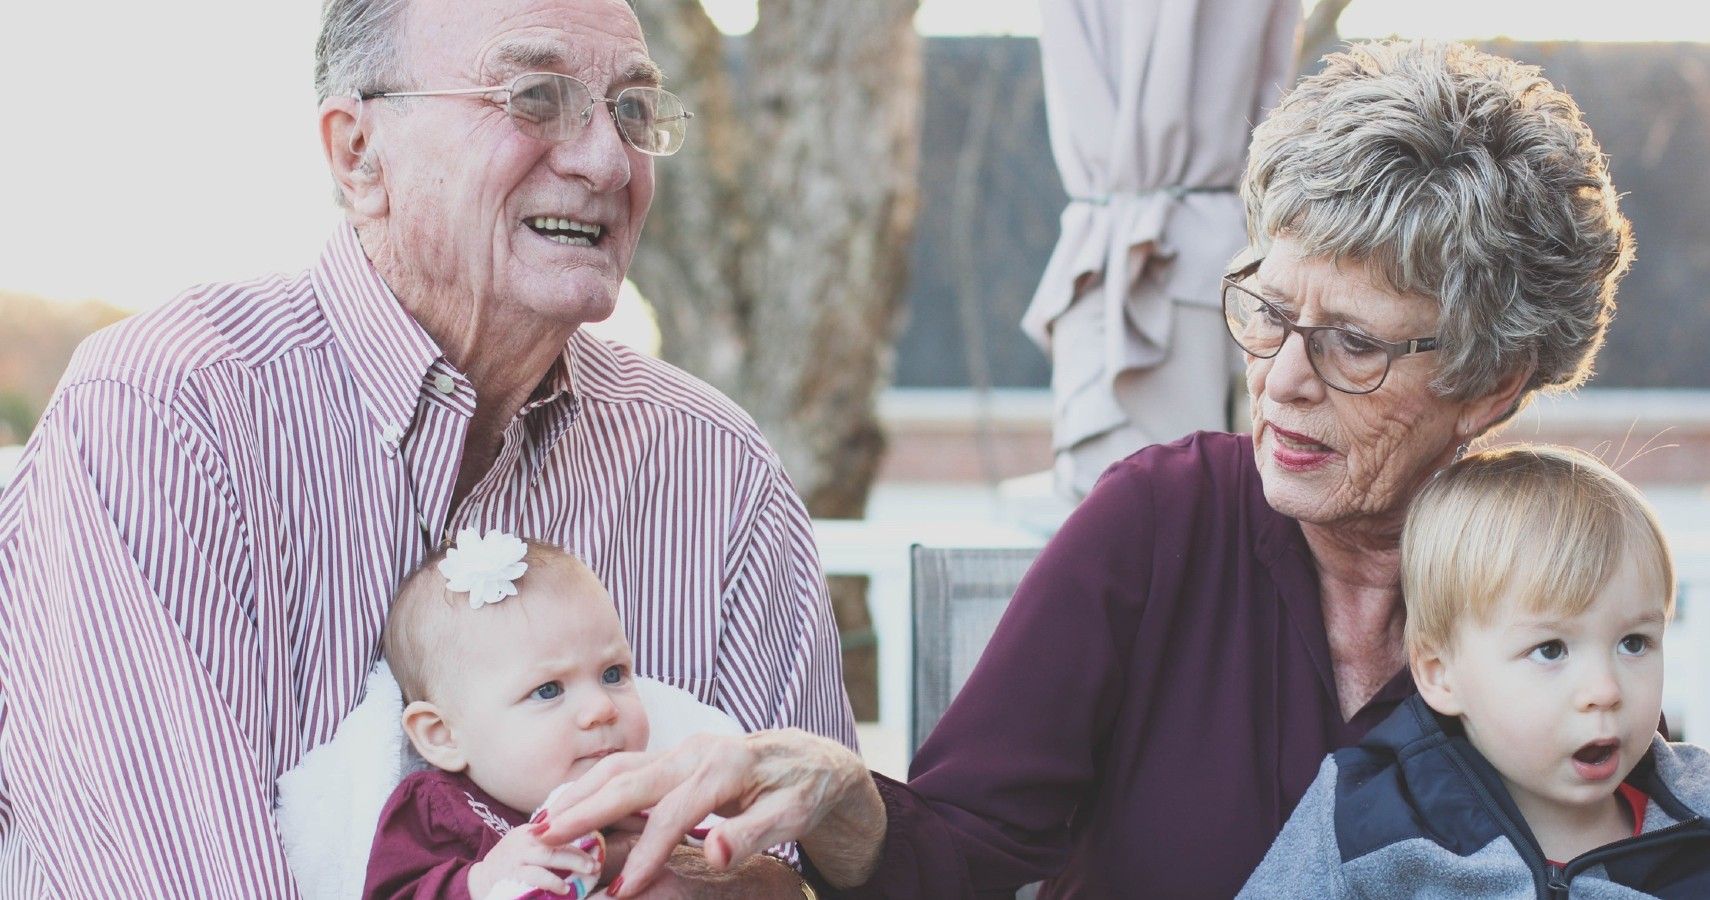 Survey Reveals The Most Hated Baby Names According To Grandparents